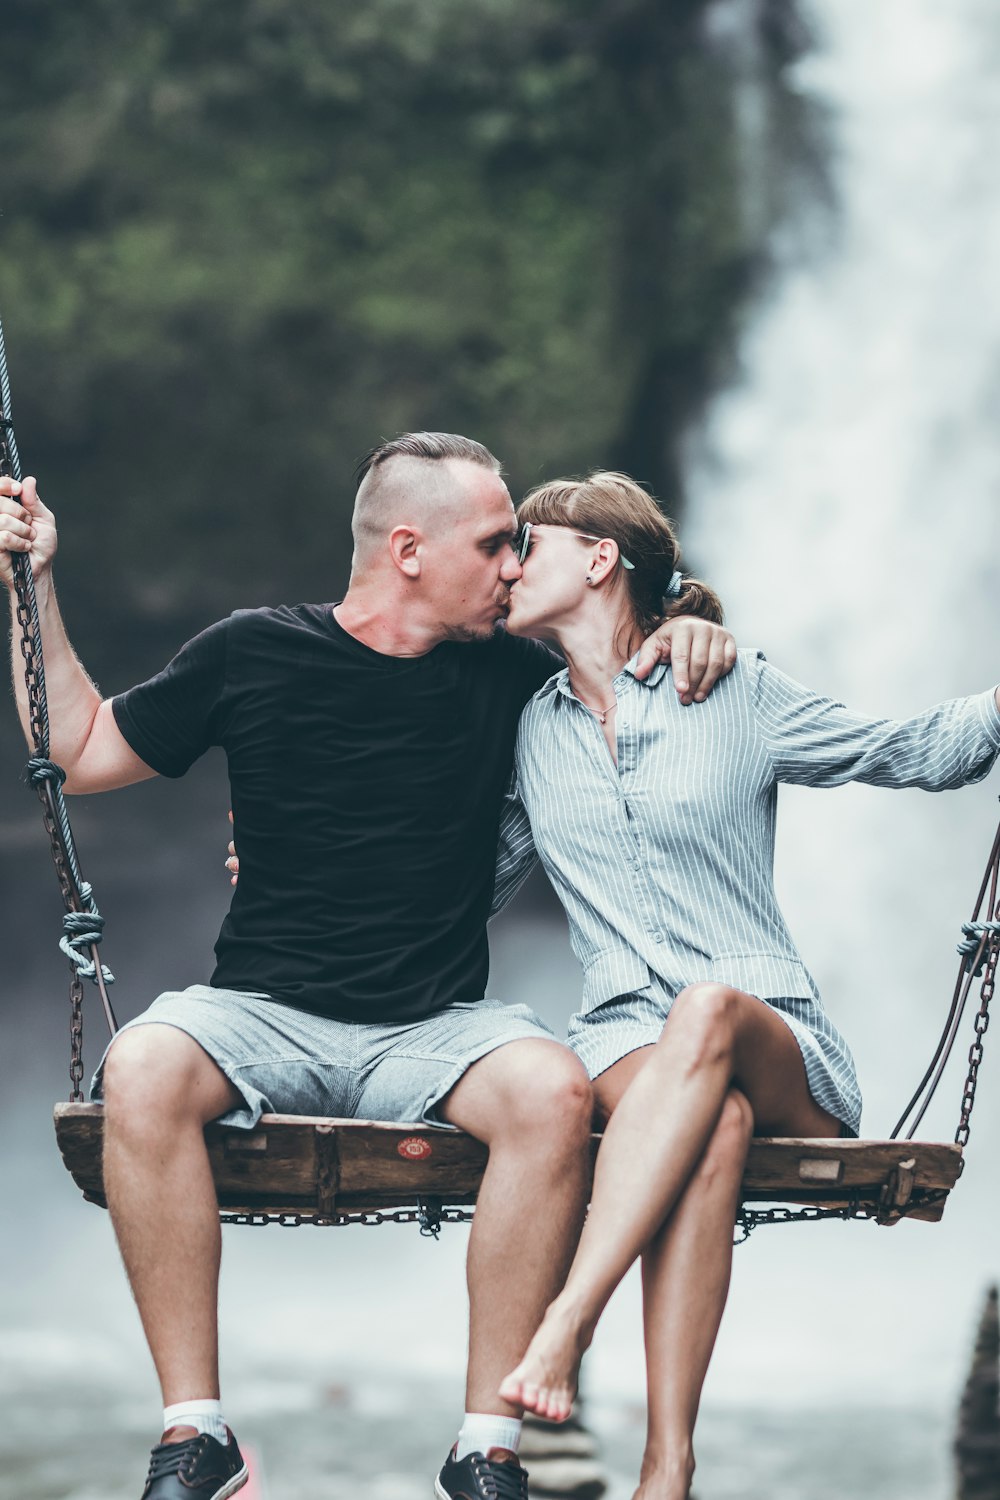 man and woman kissing while riding on swing bench